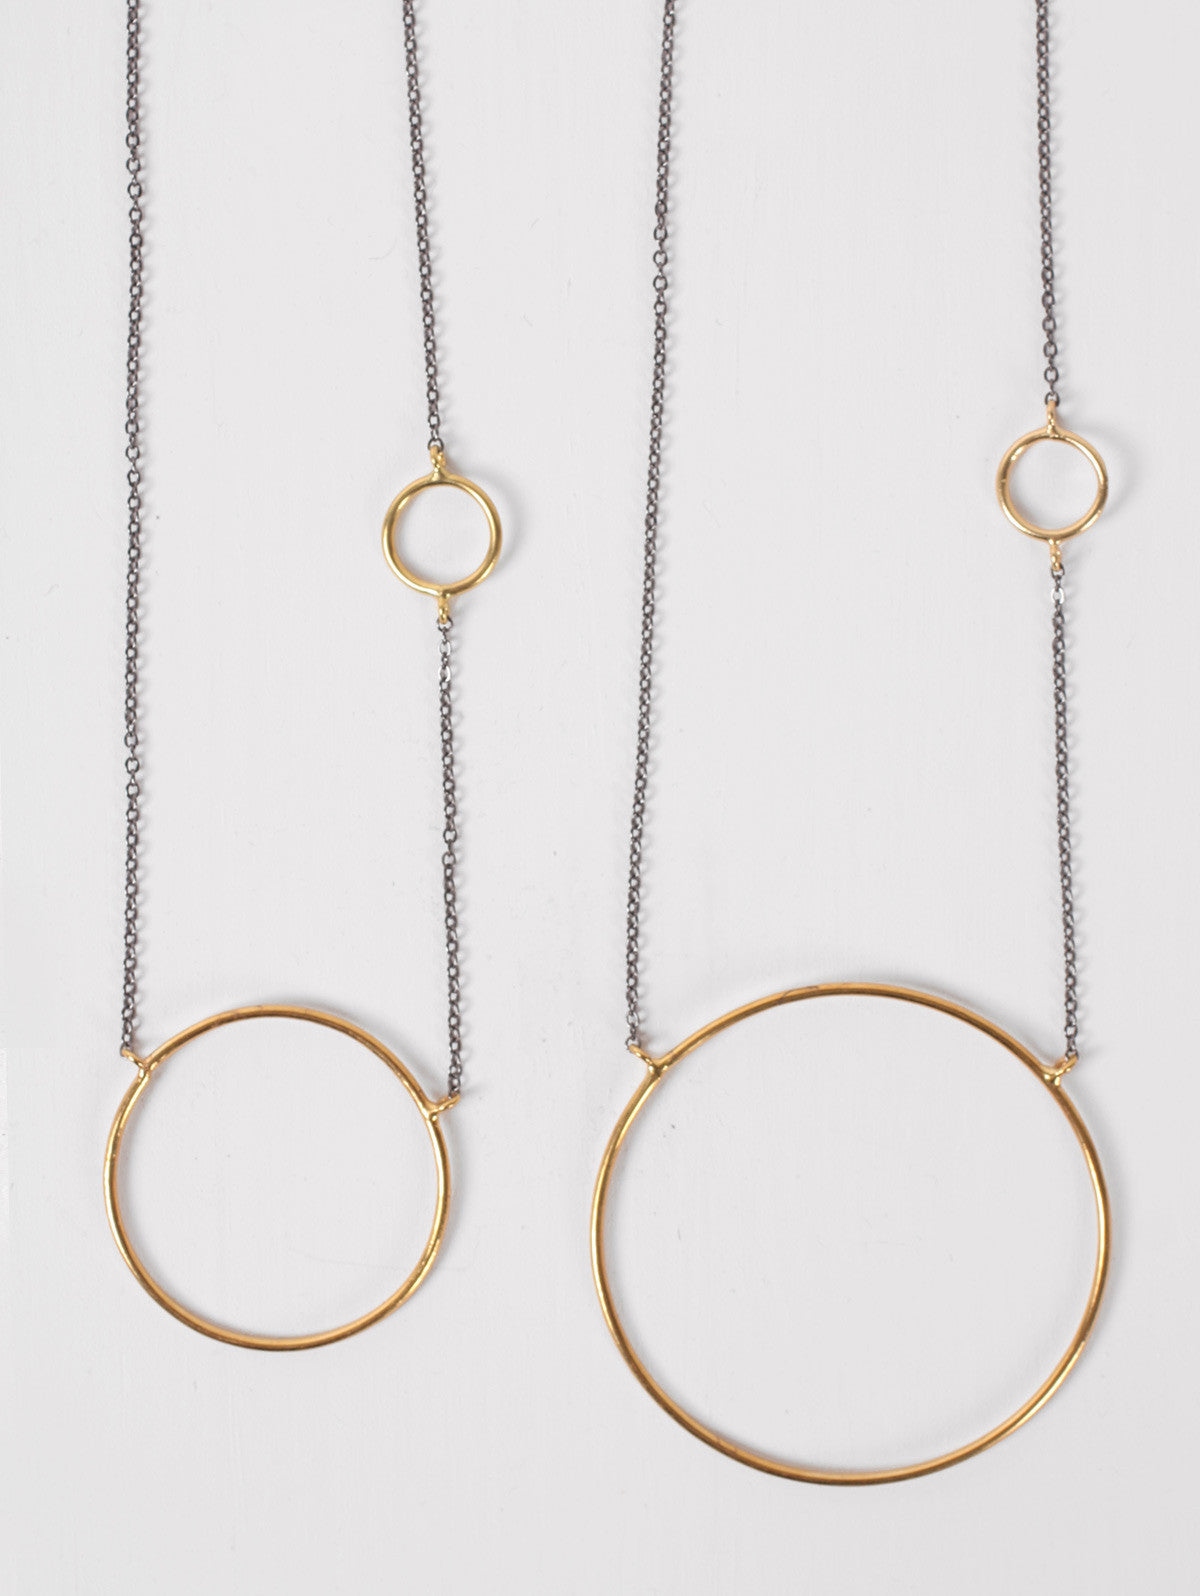 Gold Juno Necklaces with Oxidised Chain